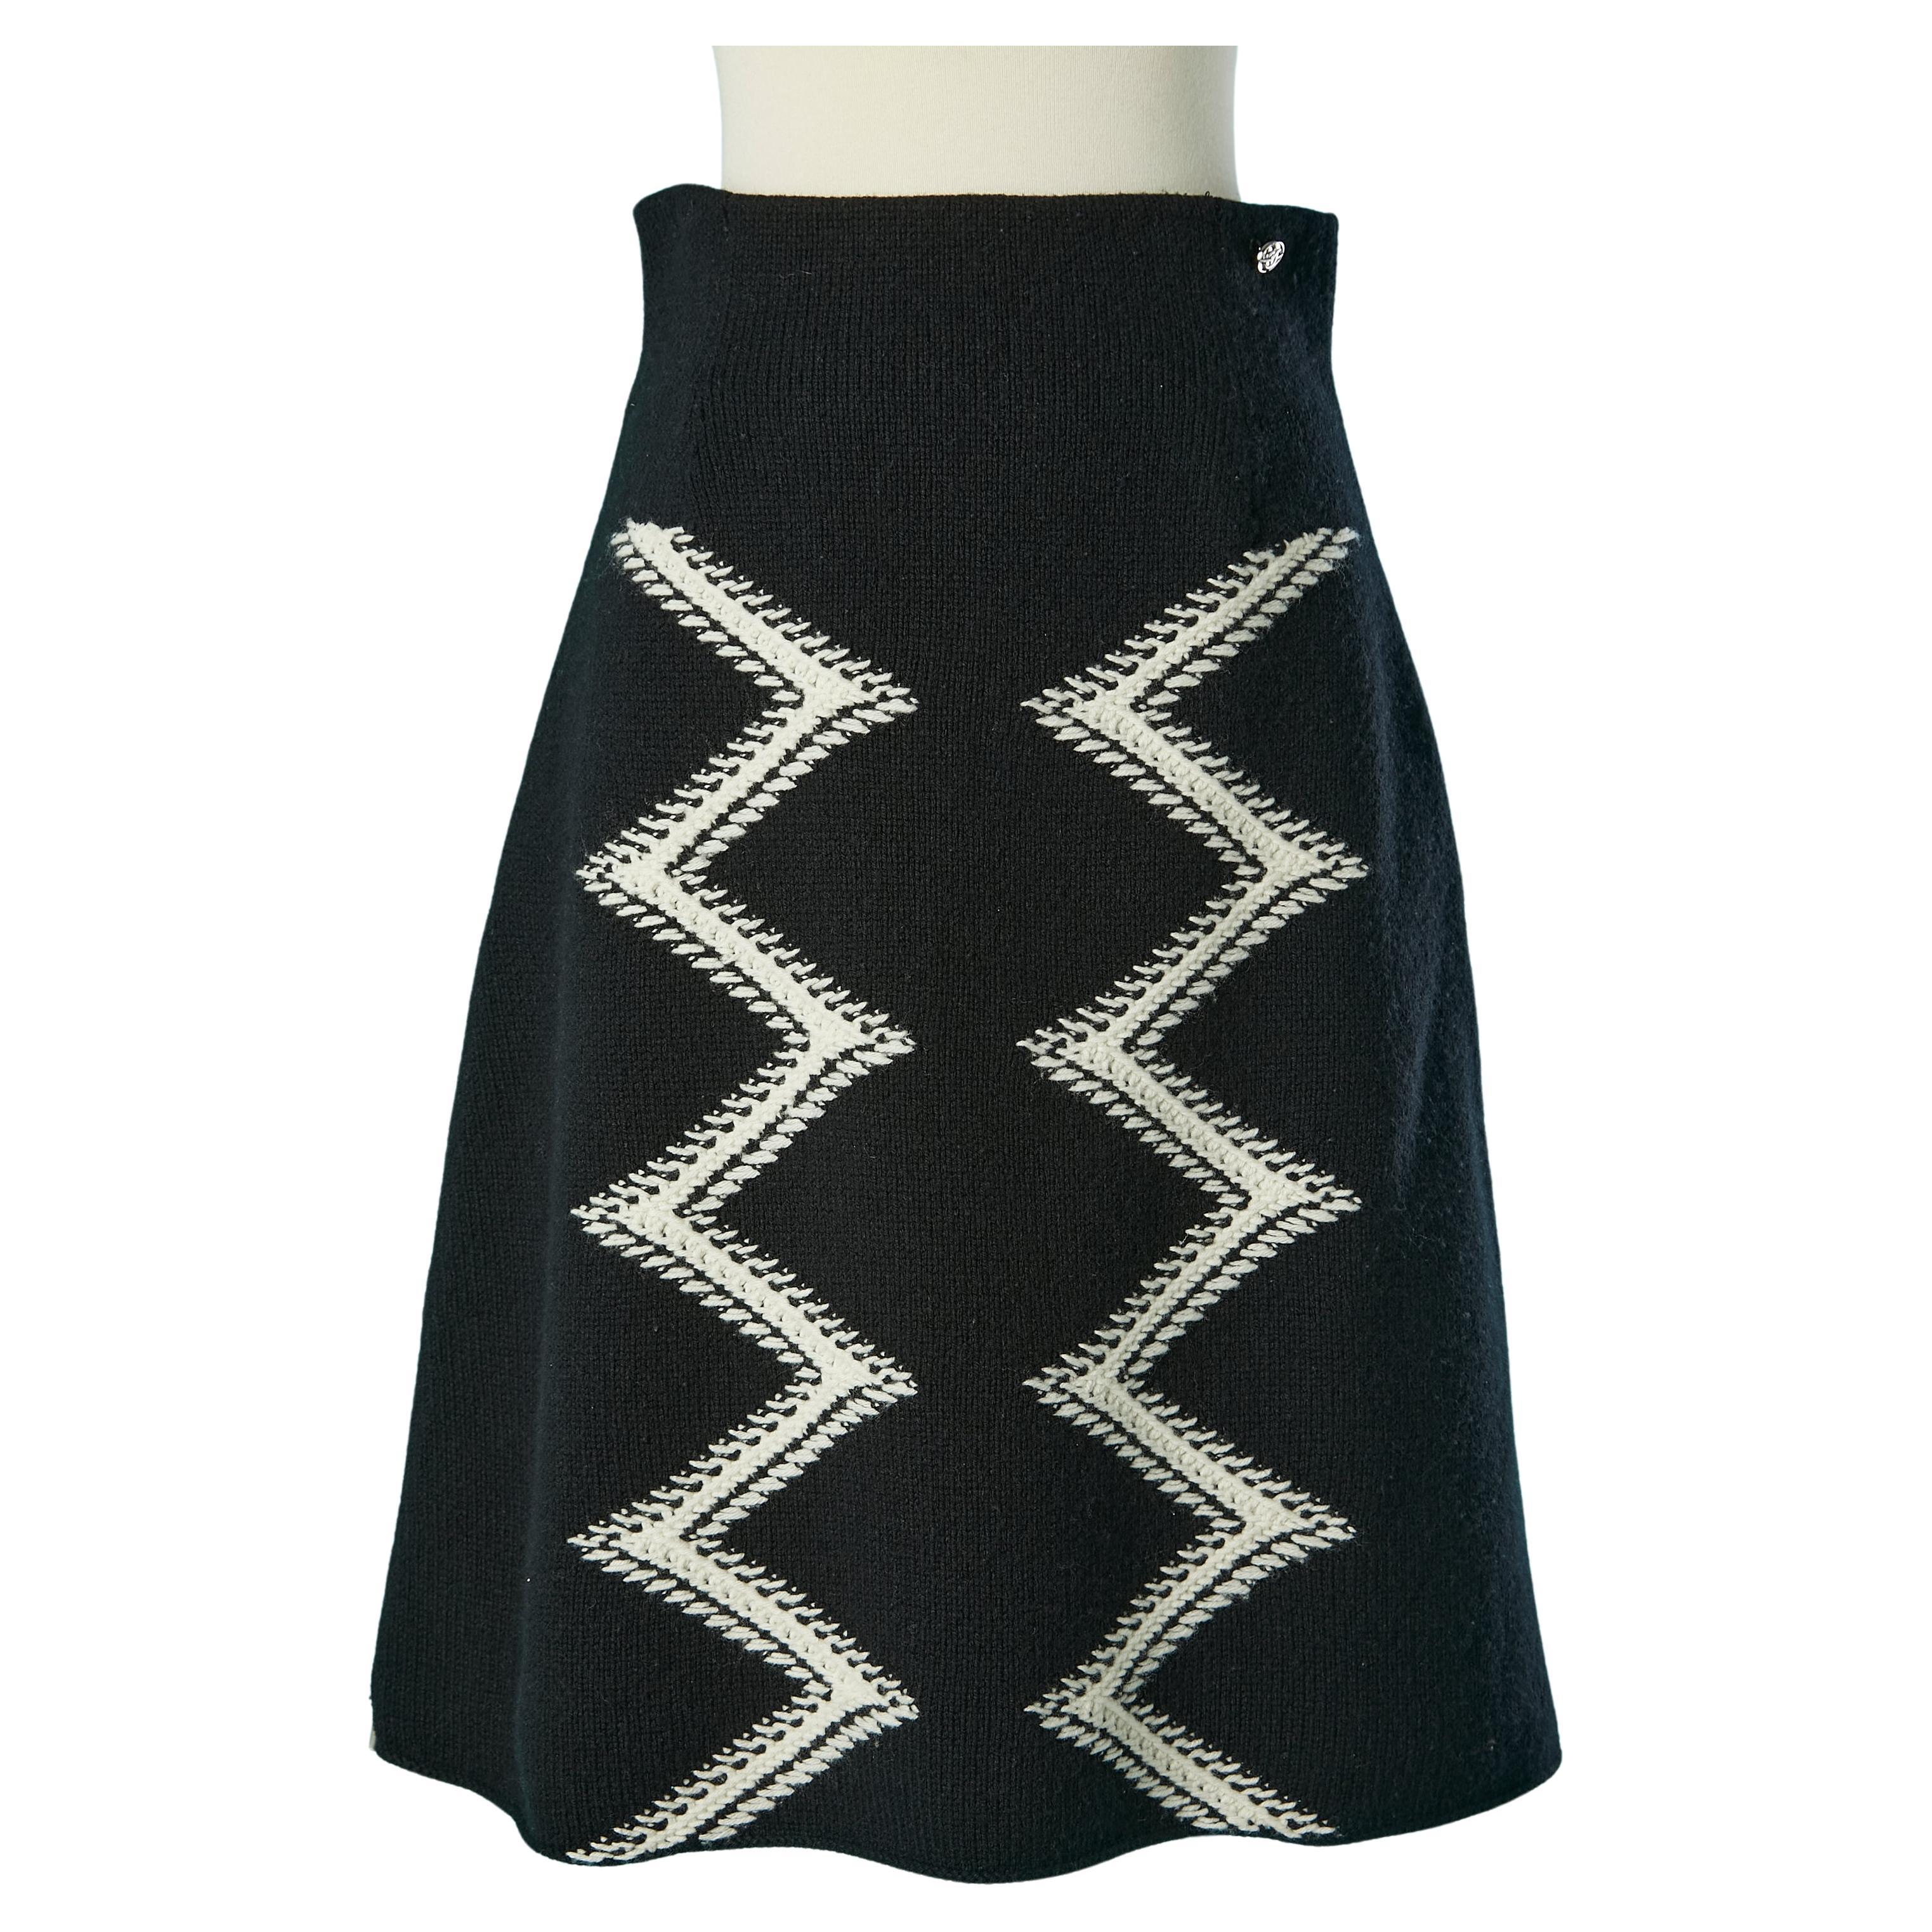 Black&white cashmere knit skirt with zip on both side and graphic lining Chanel  For Sale